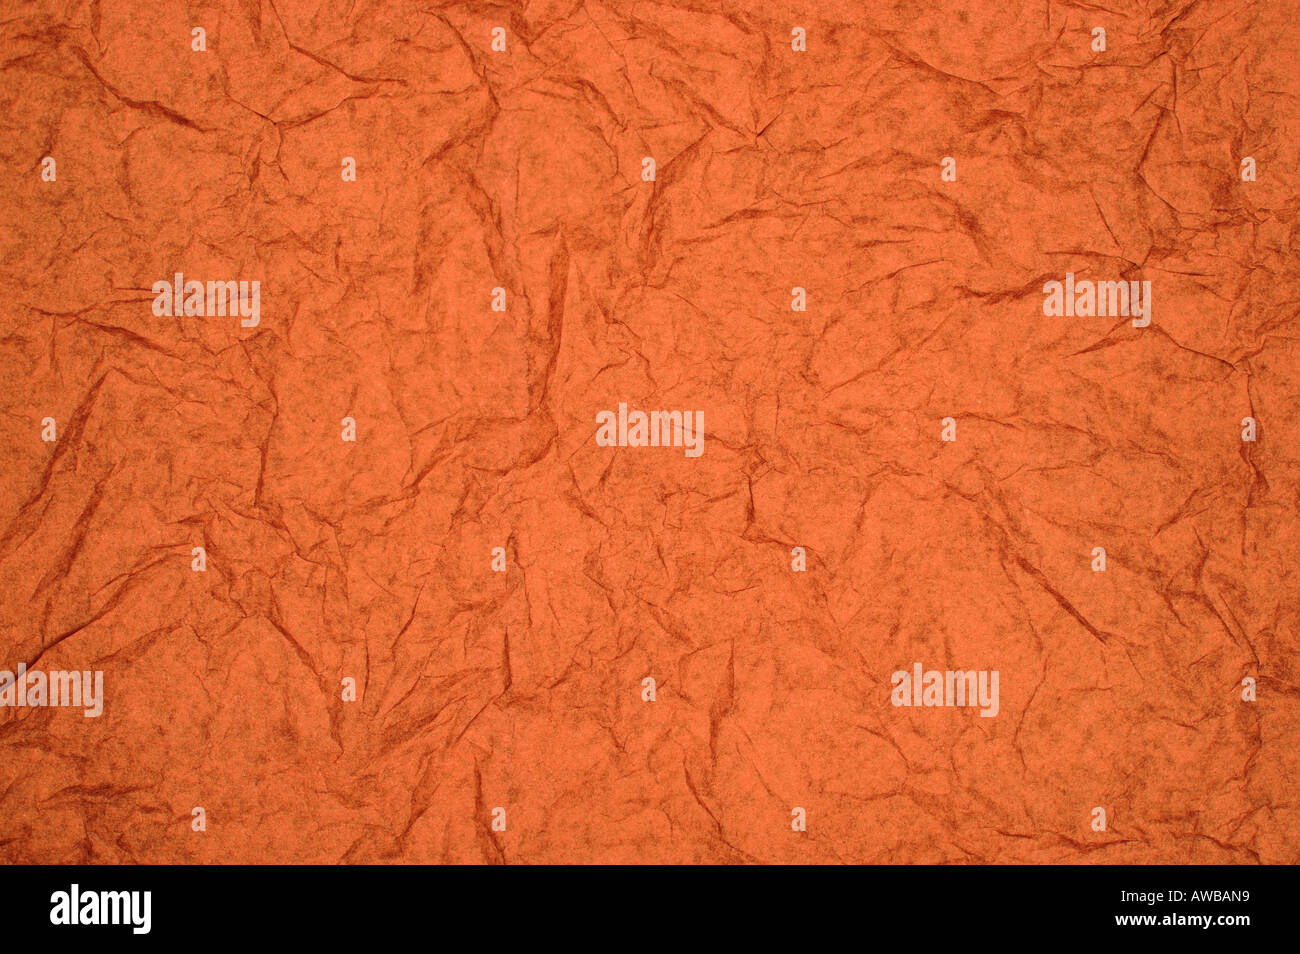 ABSTRACT RANDOM BACKGROUND OF CREASED CRUMPLED ORANGE RED TISSUE PAPER Stock Photo